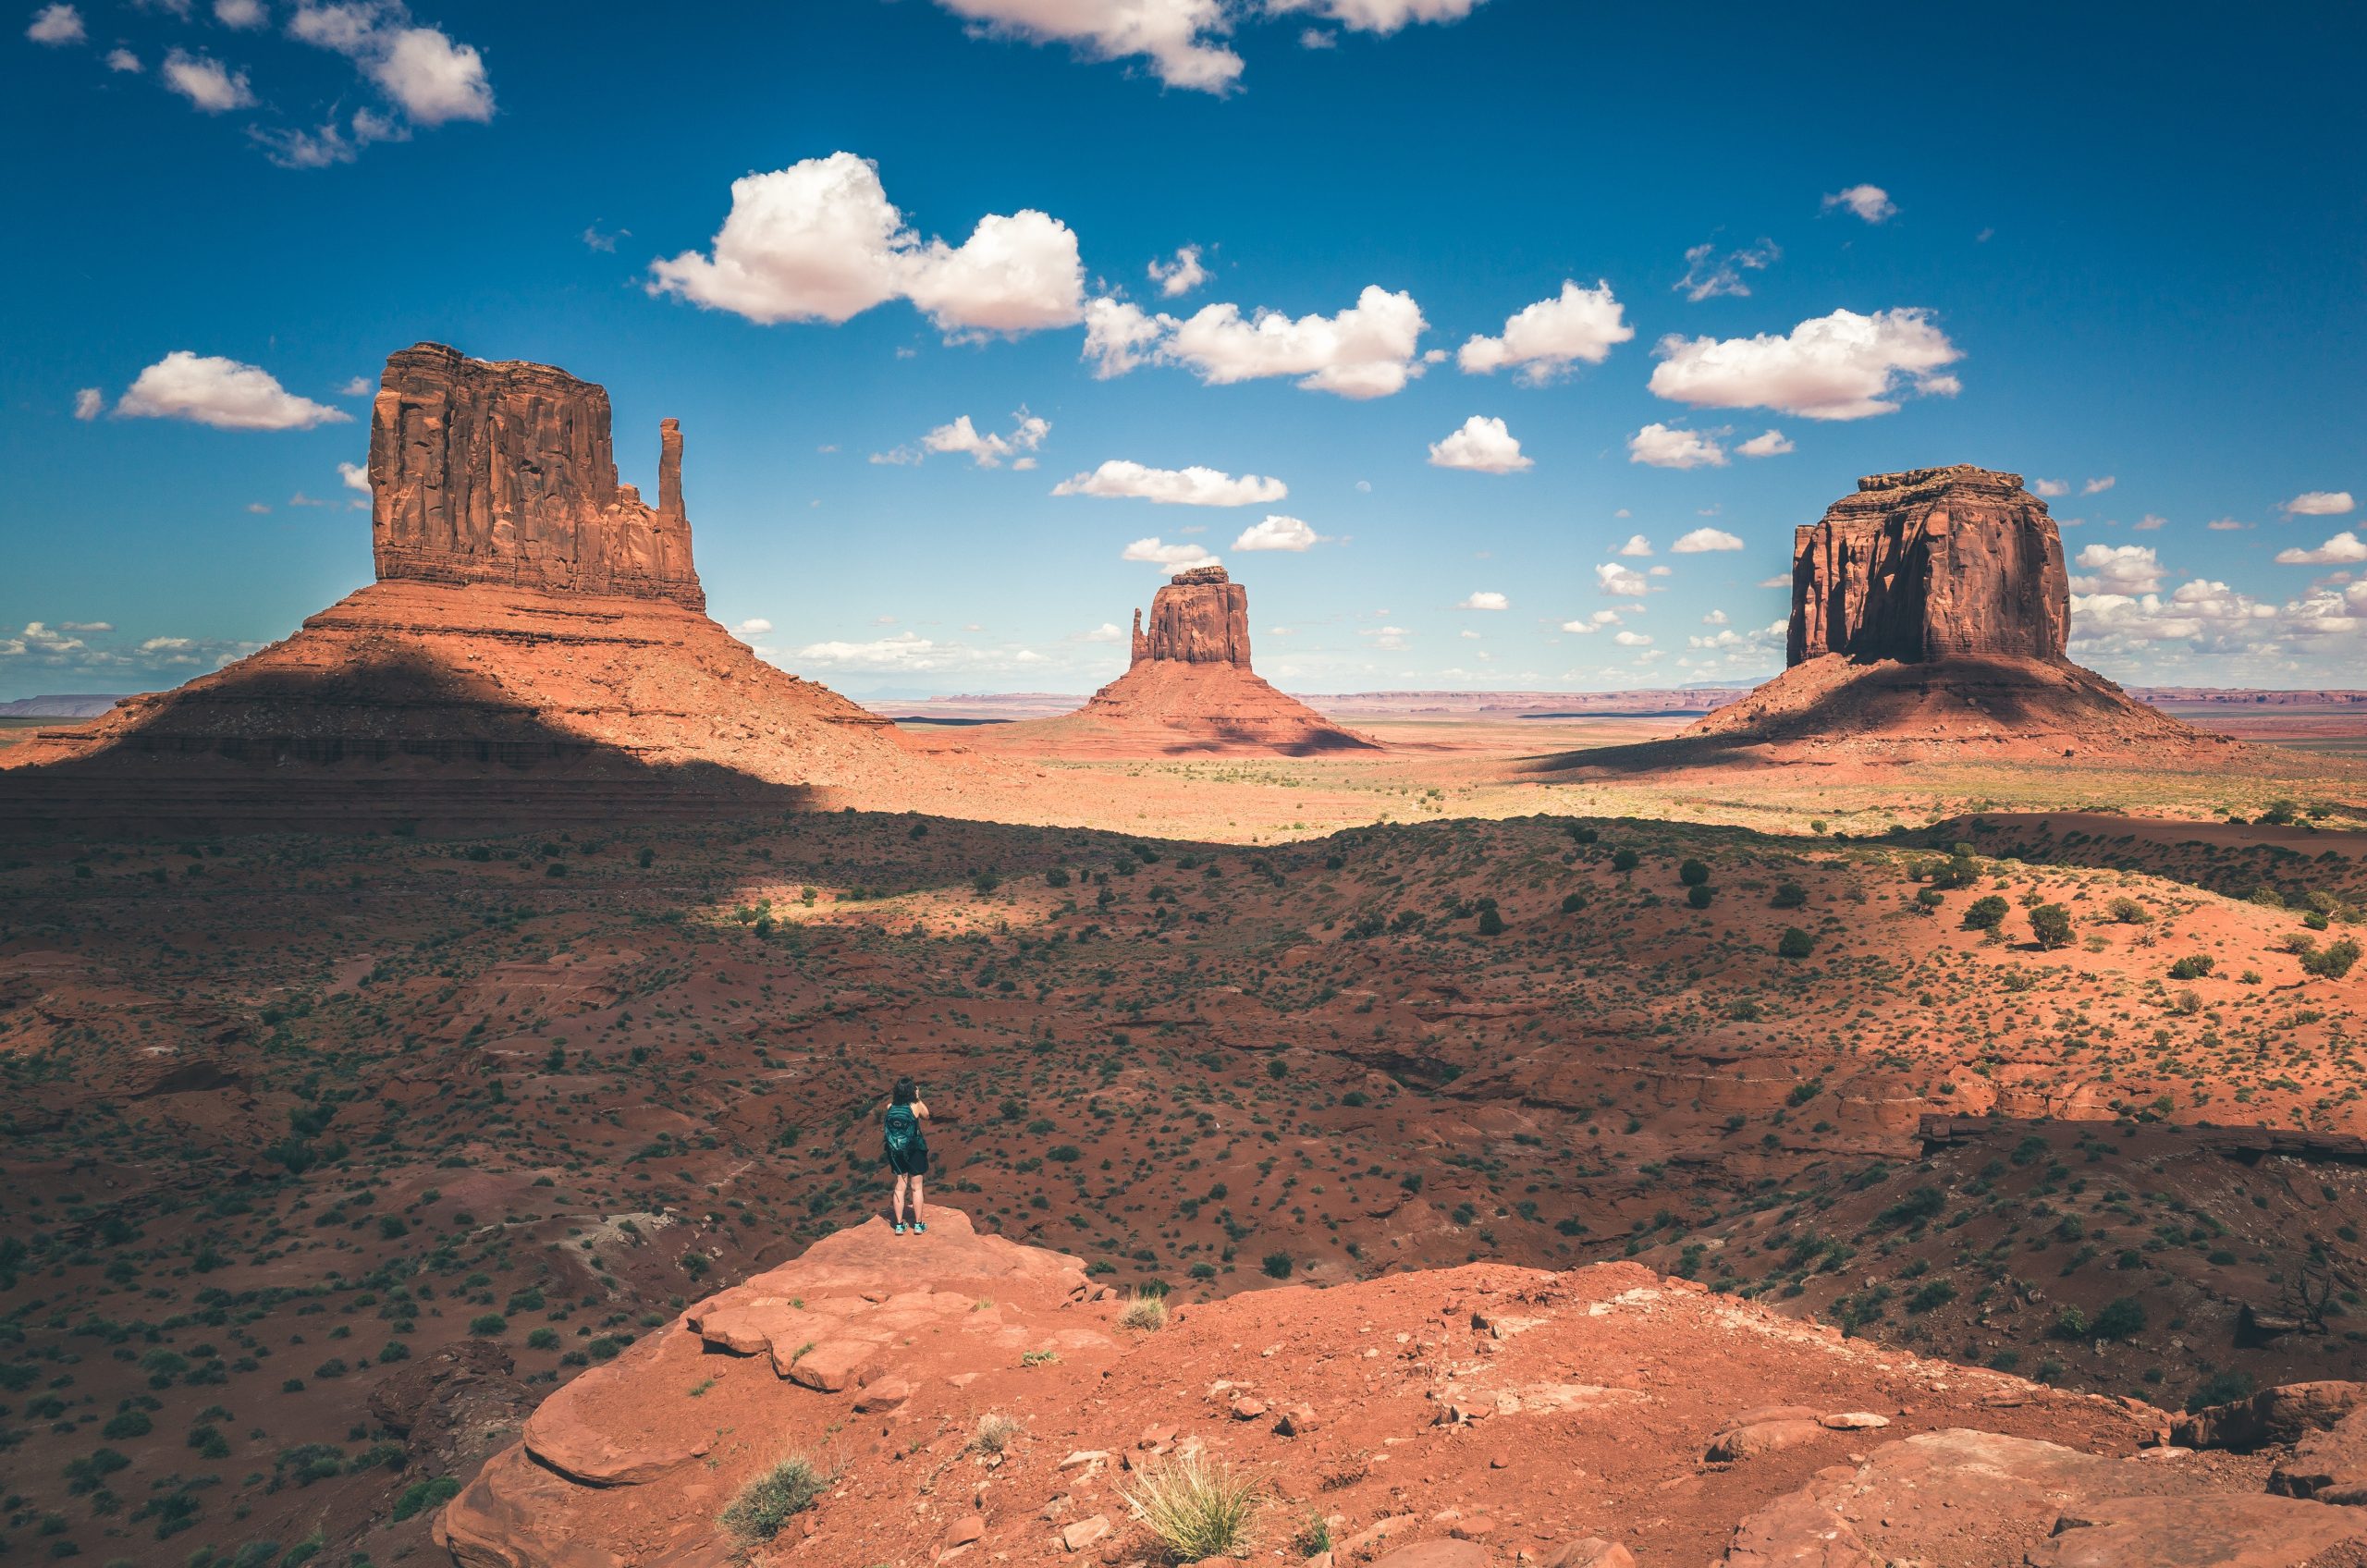 Hiker stands on top of peak looking at three sandstone buttes in the distance